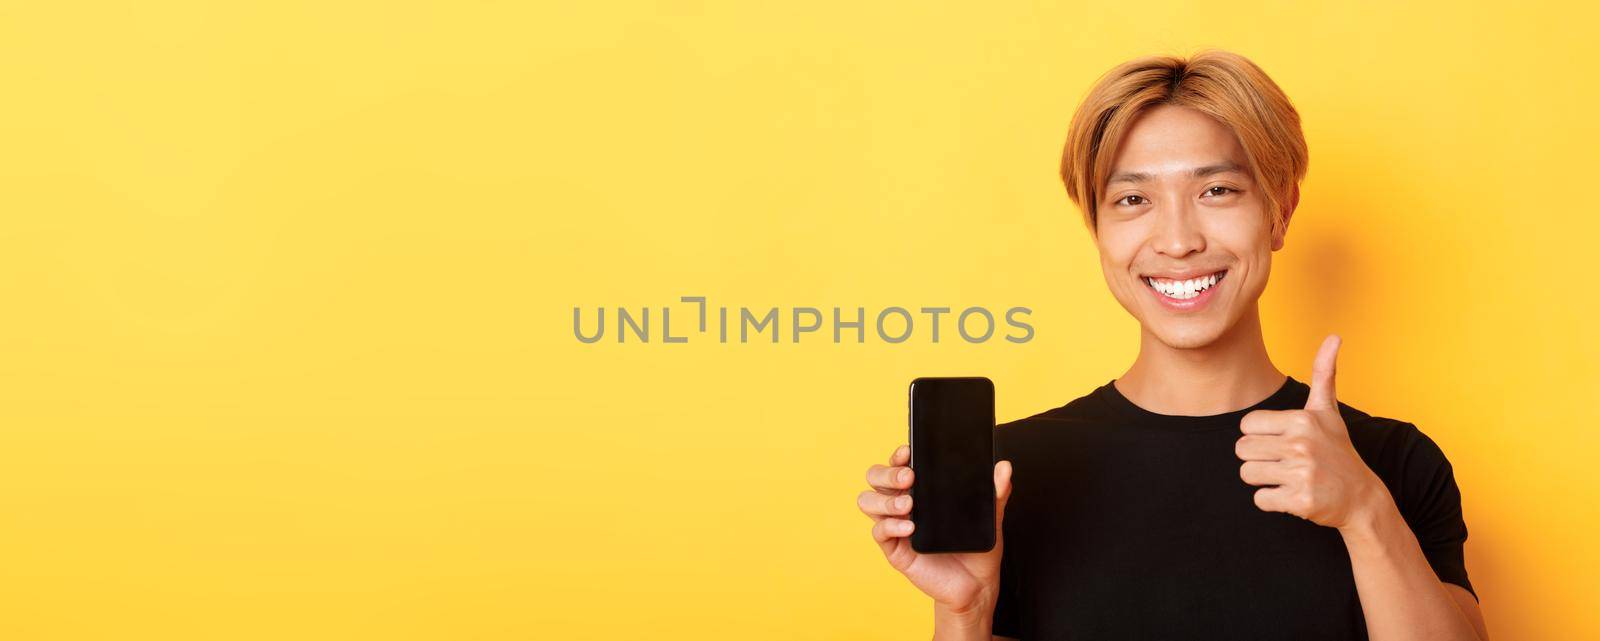 Satisfied handsomea young asian guy with fair hair, showing thumbs-up in approval and smartphone screen, standing over yellow background.